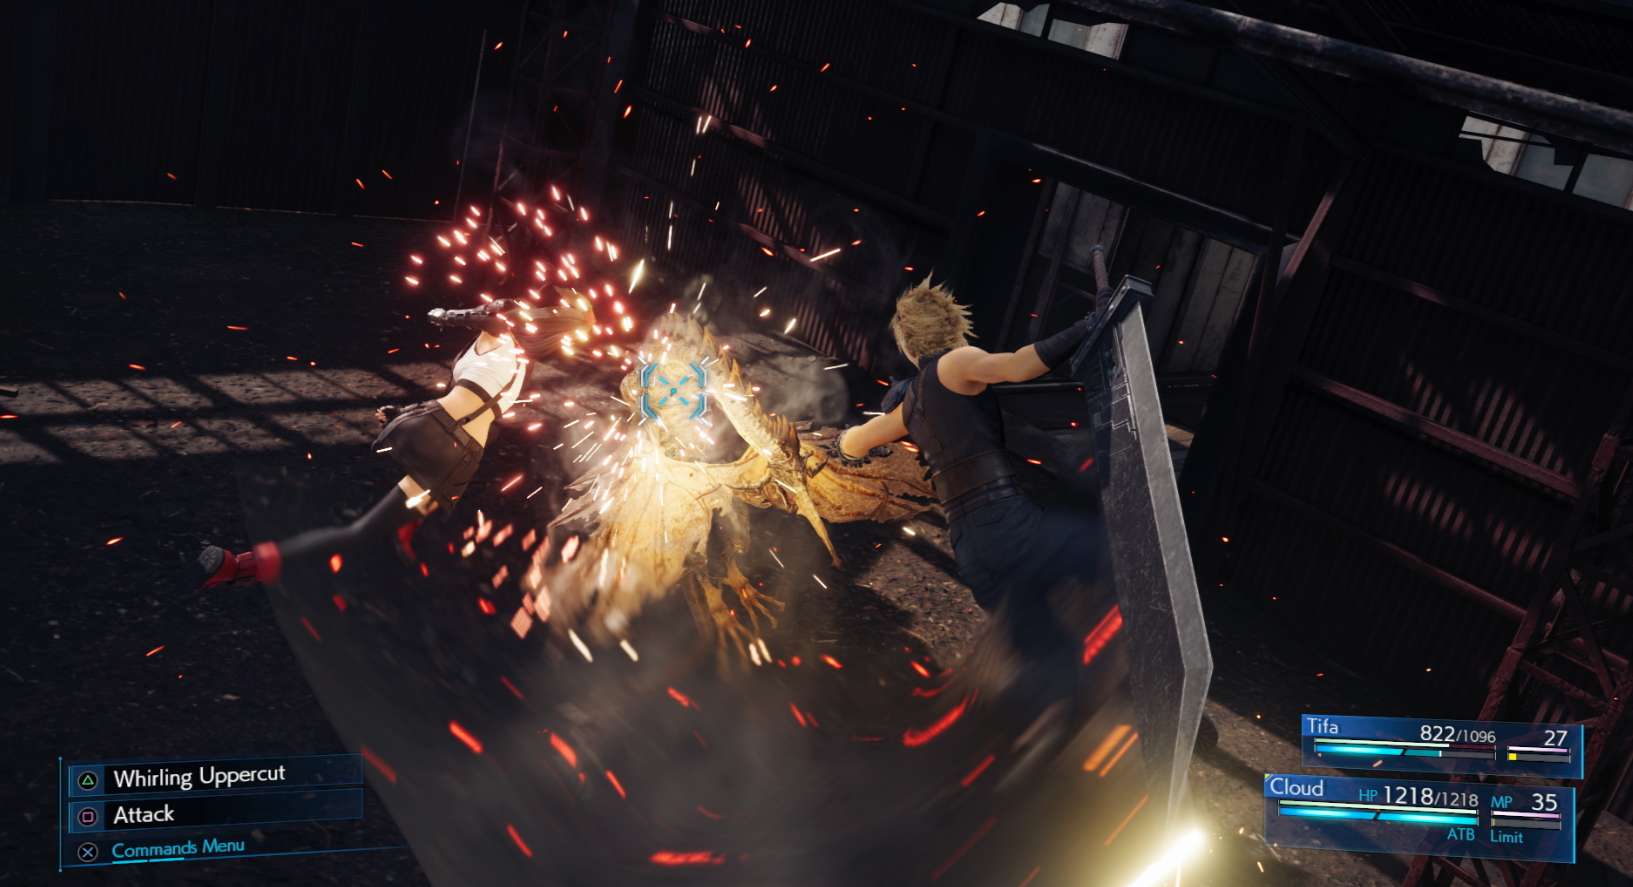 Final Fantasy 7 Remake Co-Director Comments On Some Of The Major Changes To The Battle System That Helped Reimagine The Original